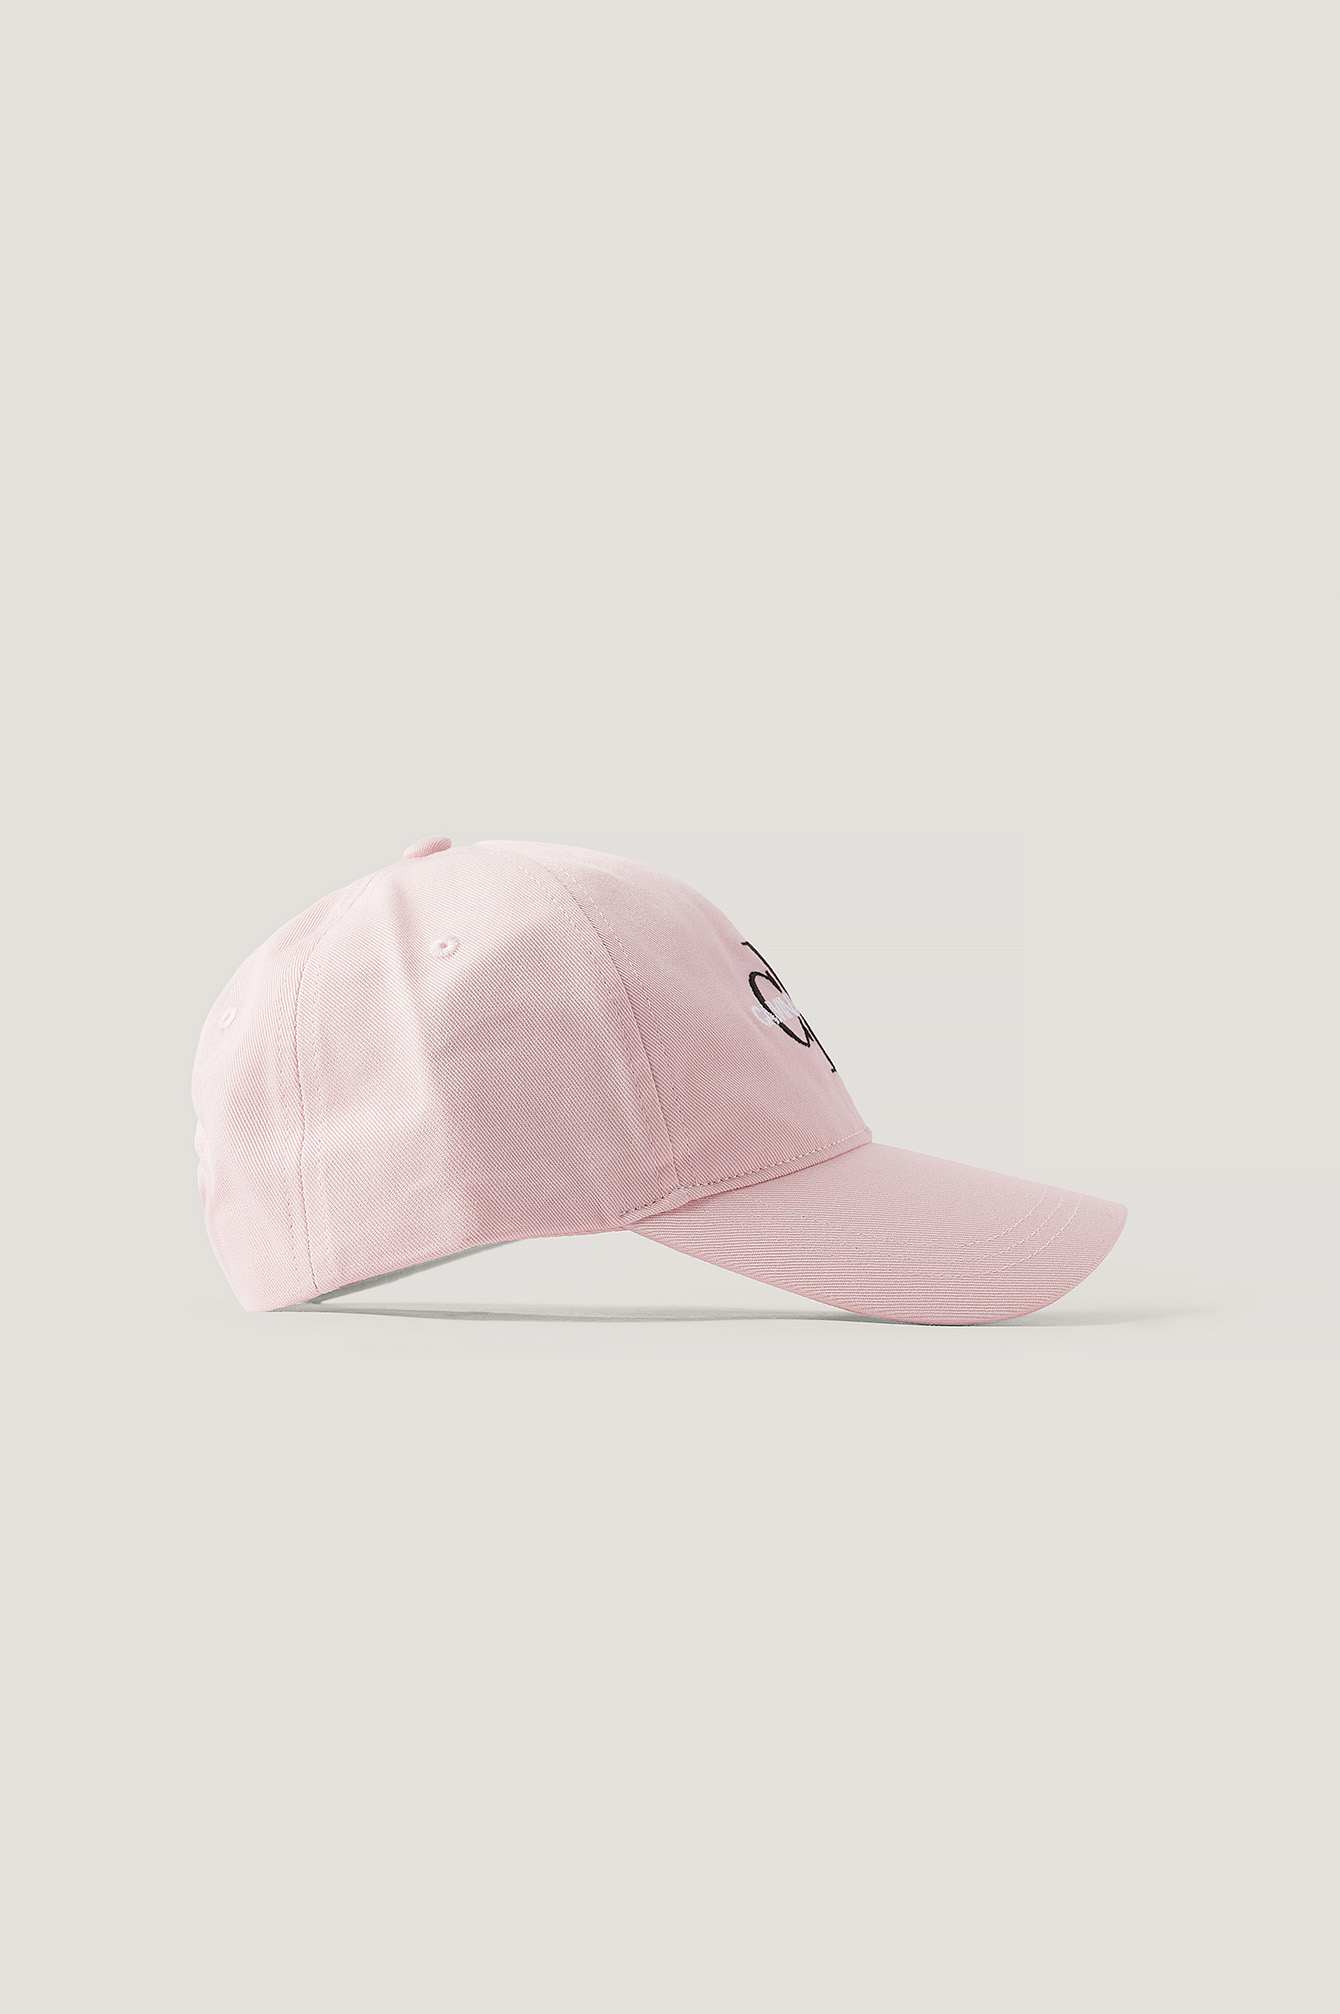 WOMEN FASHION Accessories Hat and cap Golden discount 35% NoName Pale pink cap with strass Pink/Black/Golden Single 